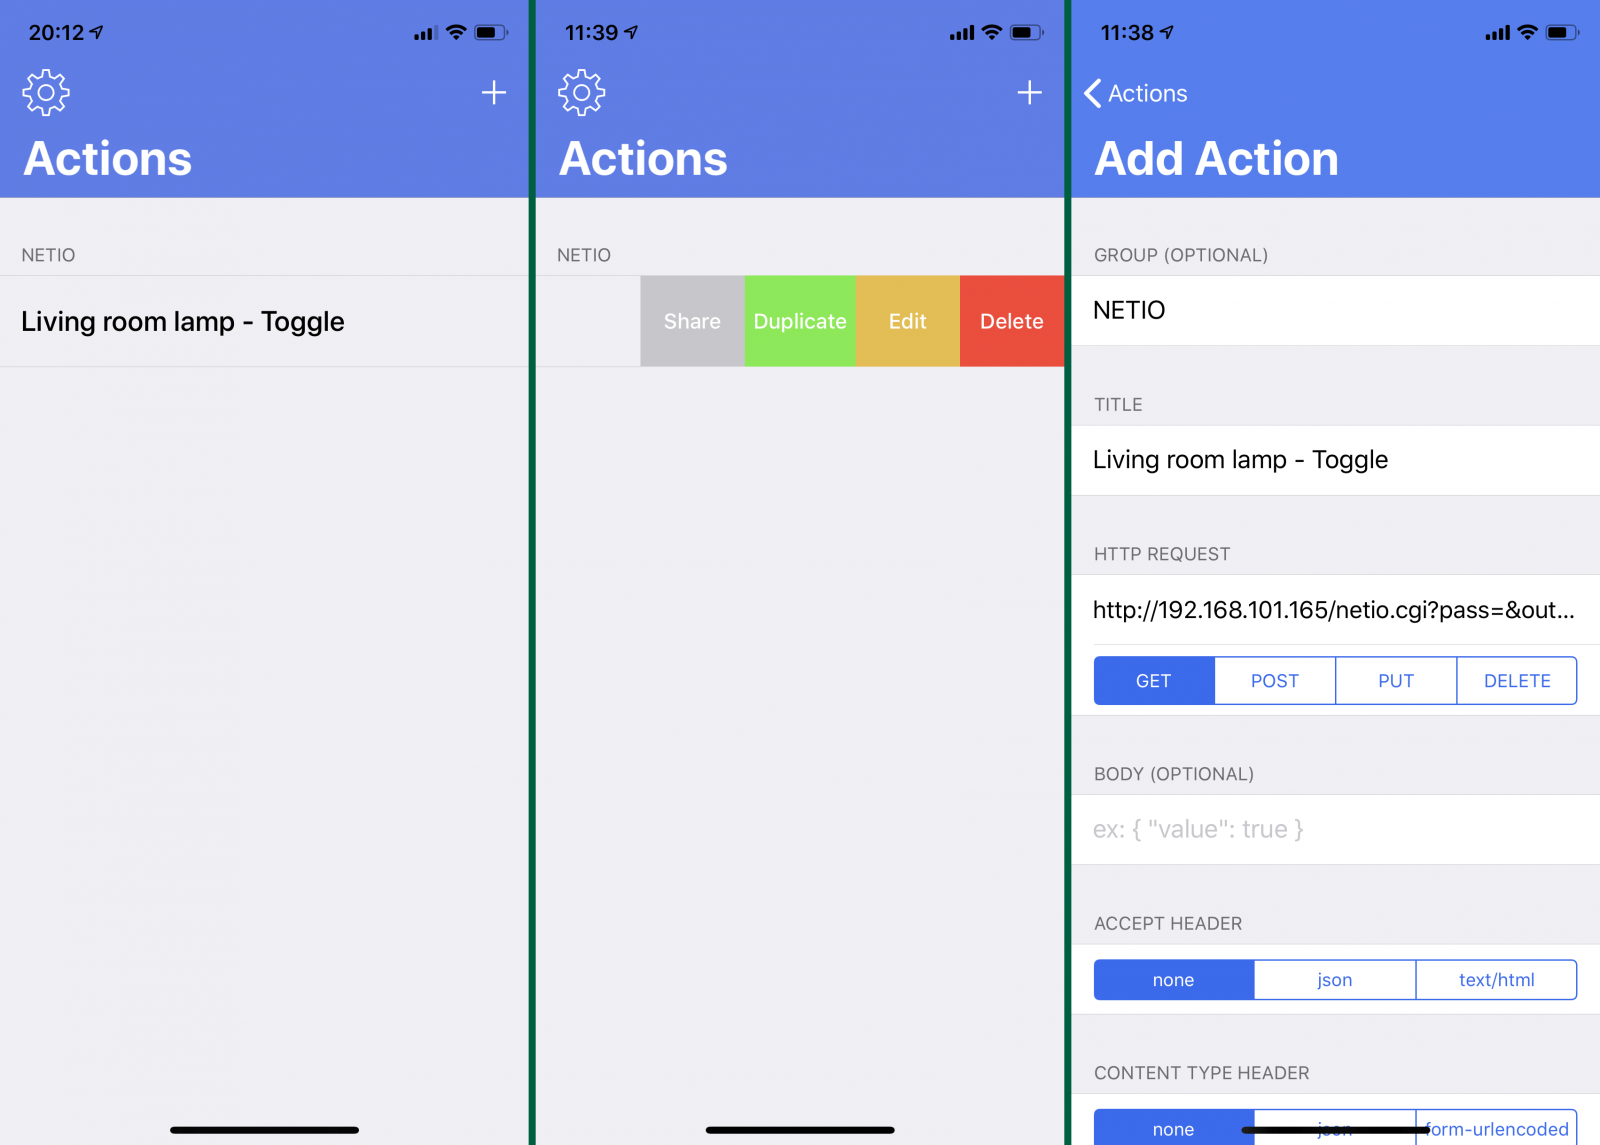 Screenshots of Actions – HTTP Request Sender, ios app for controlling NETIO networked smart power sockets